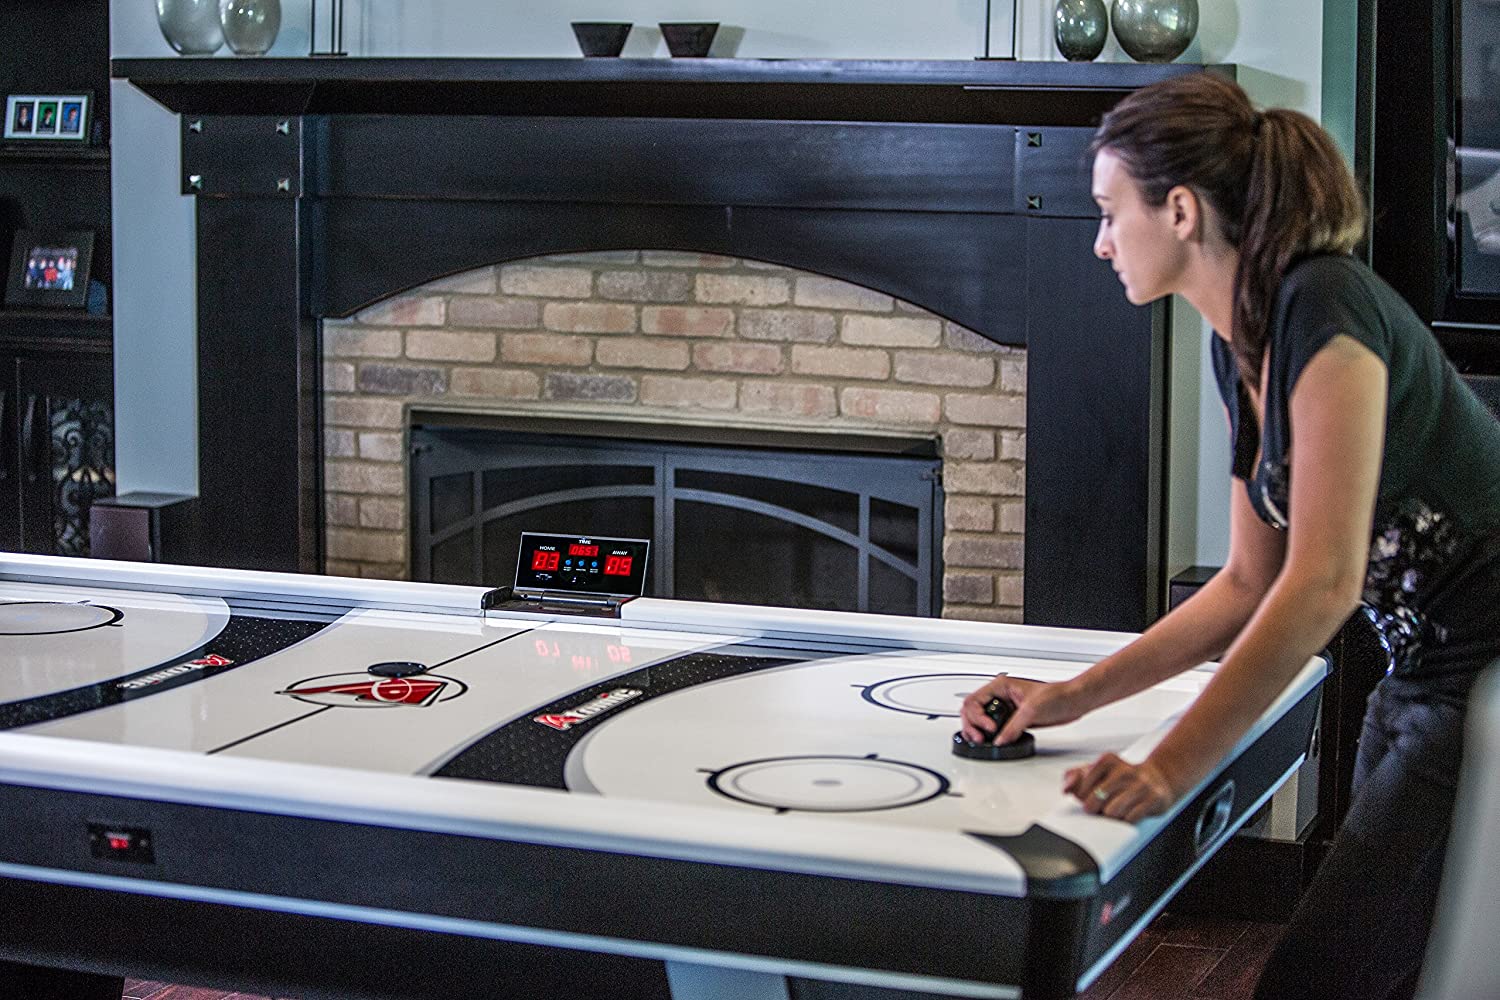 Tournament Choice Air Hockey Tables Can Help You Become A Top-Notch Air Hockey Player